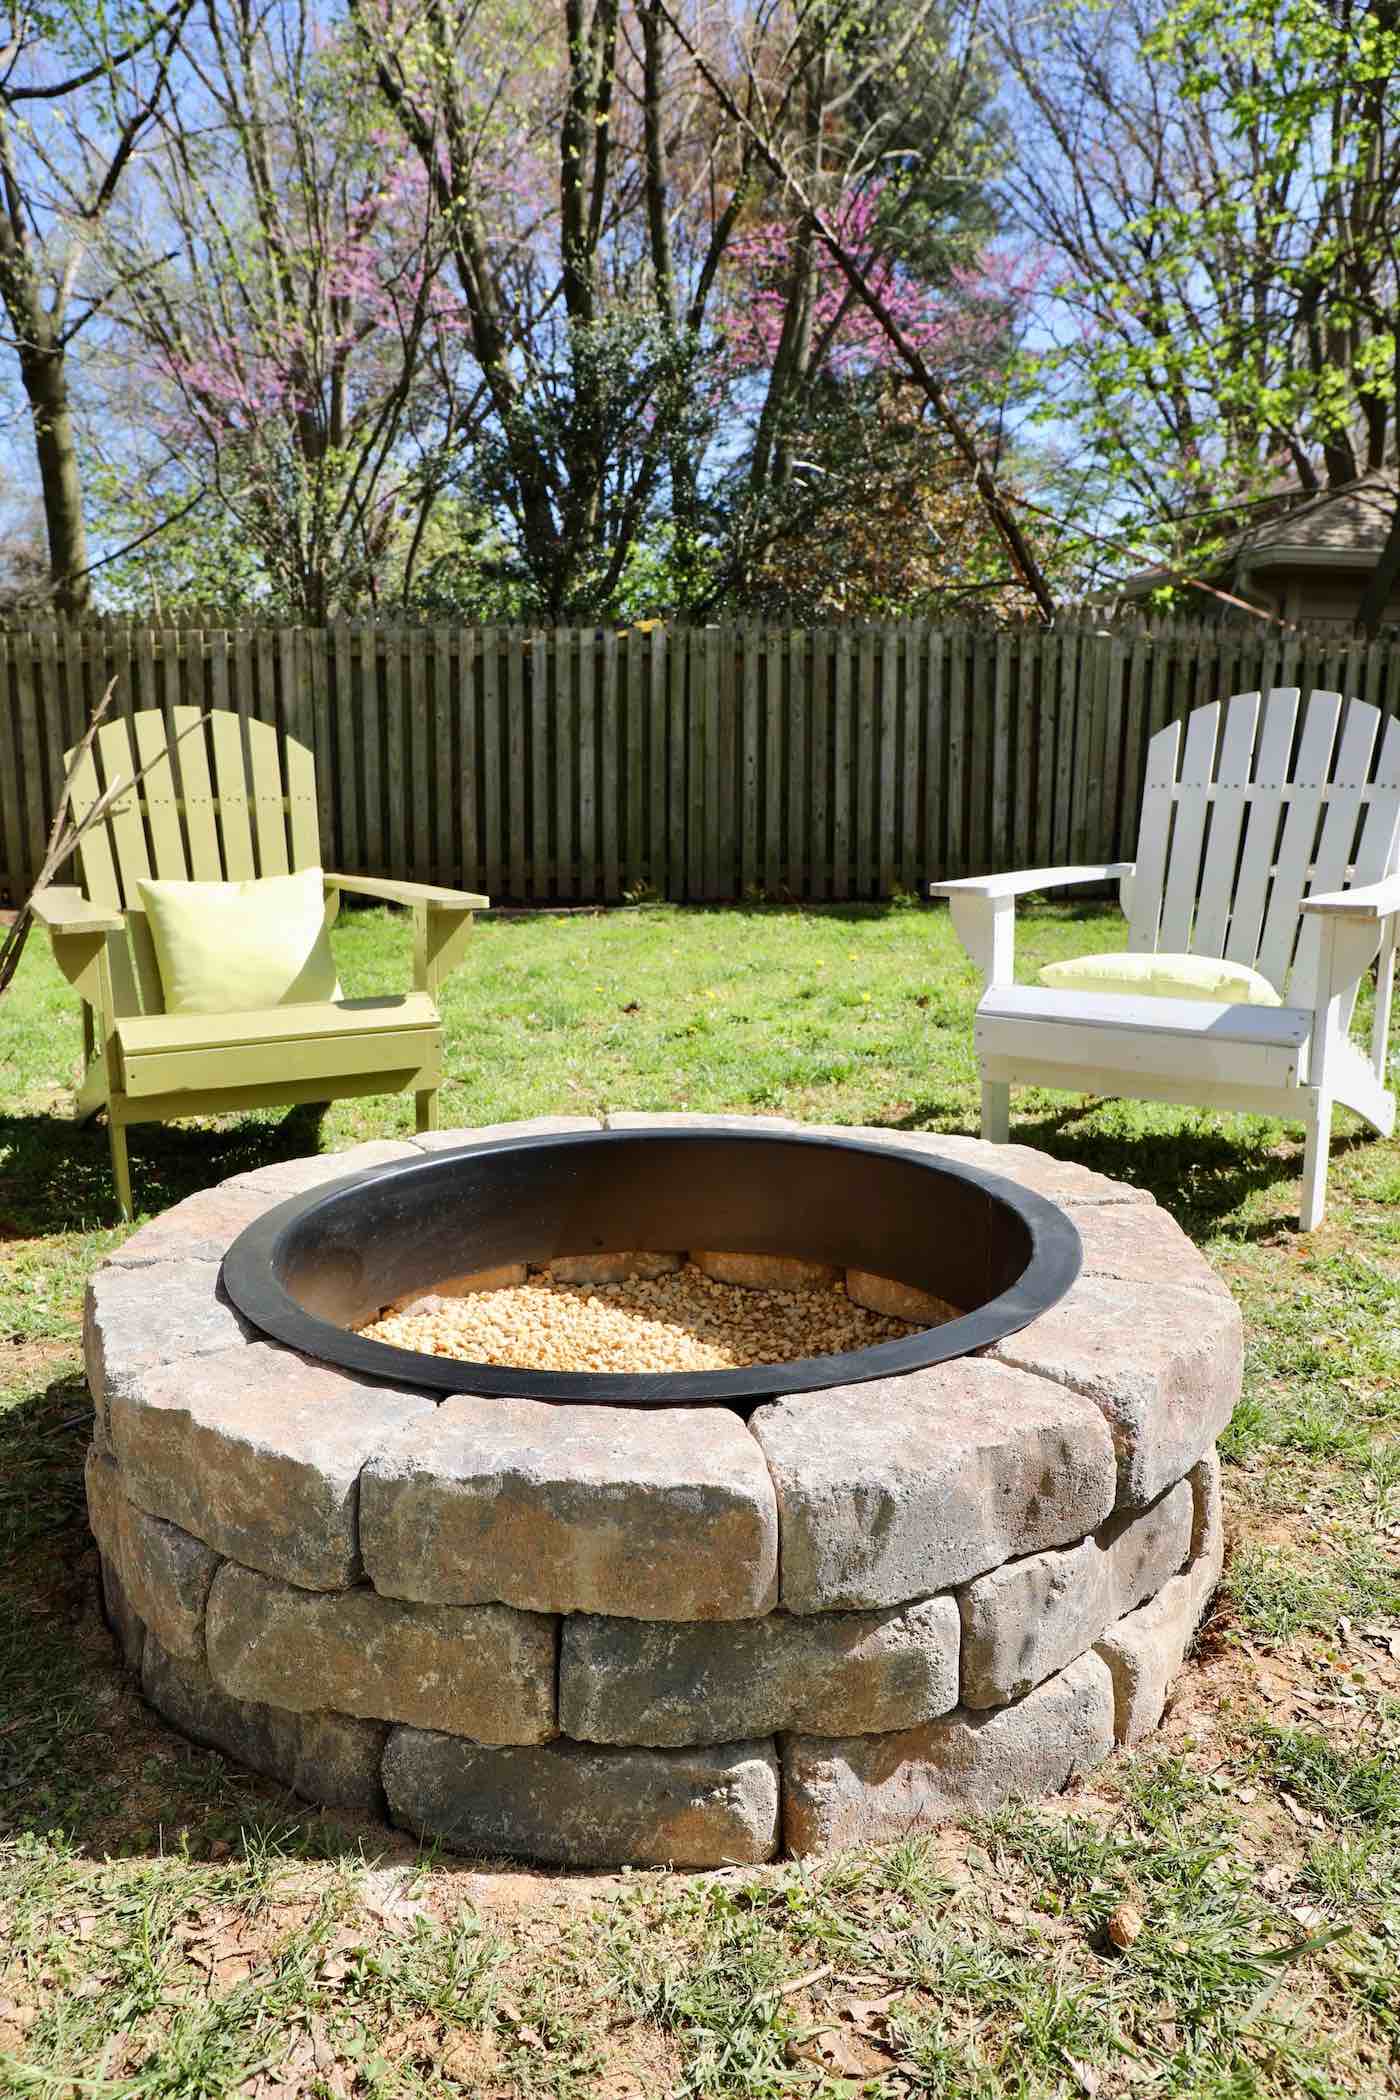 Diy Fire Pit With Gravel Stones, How Do You Build A Fire Pit Seating Area